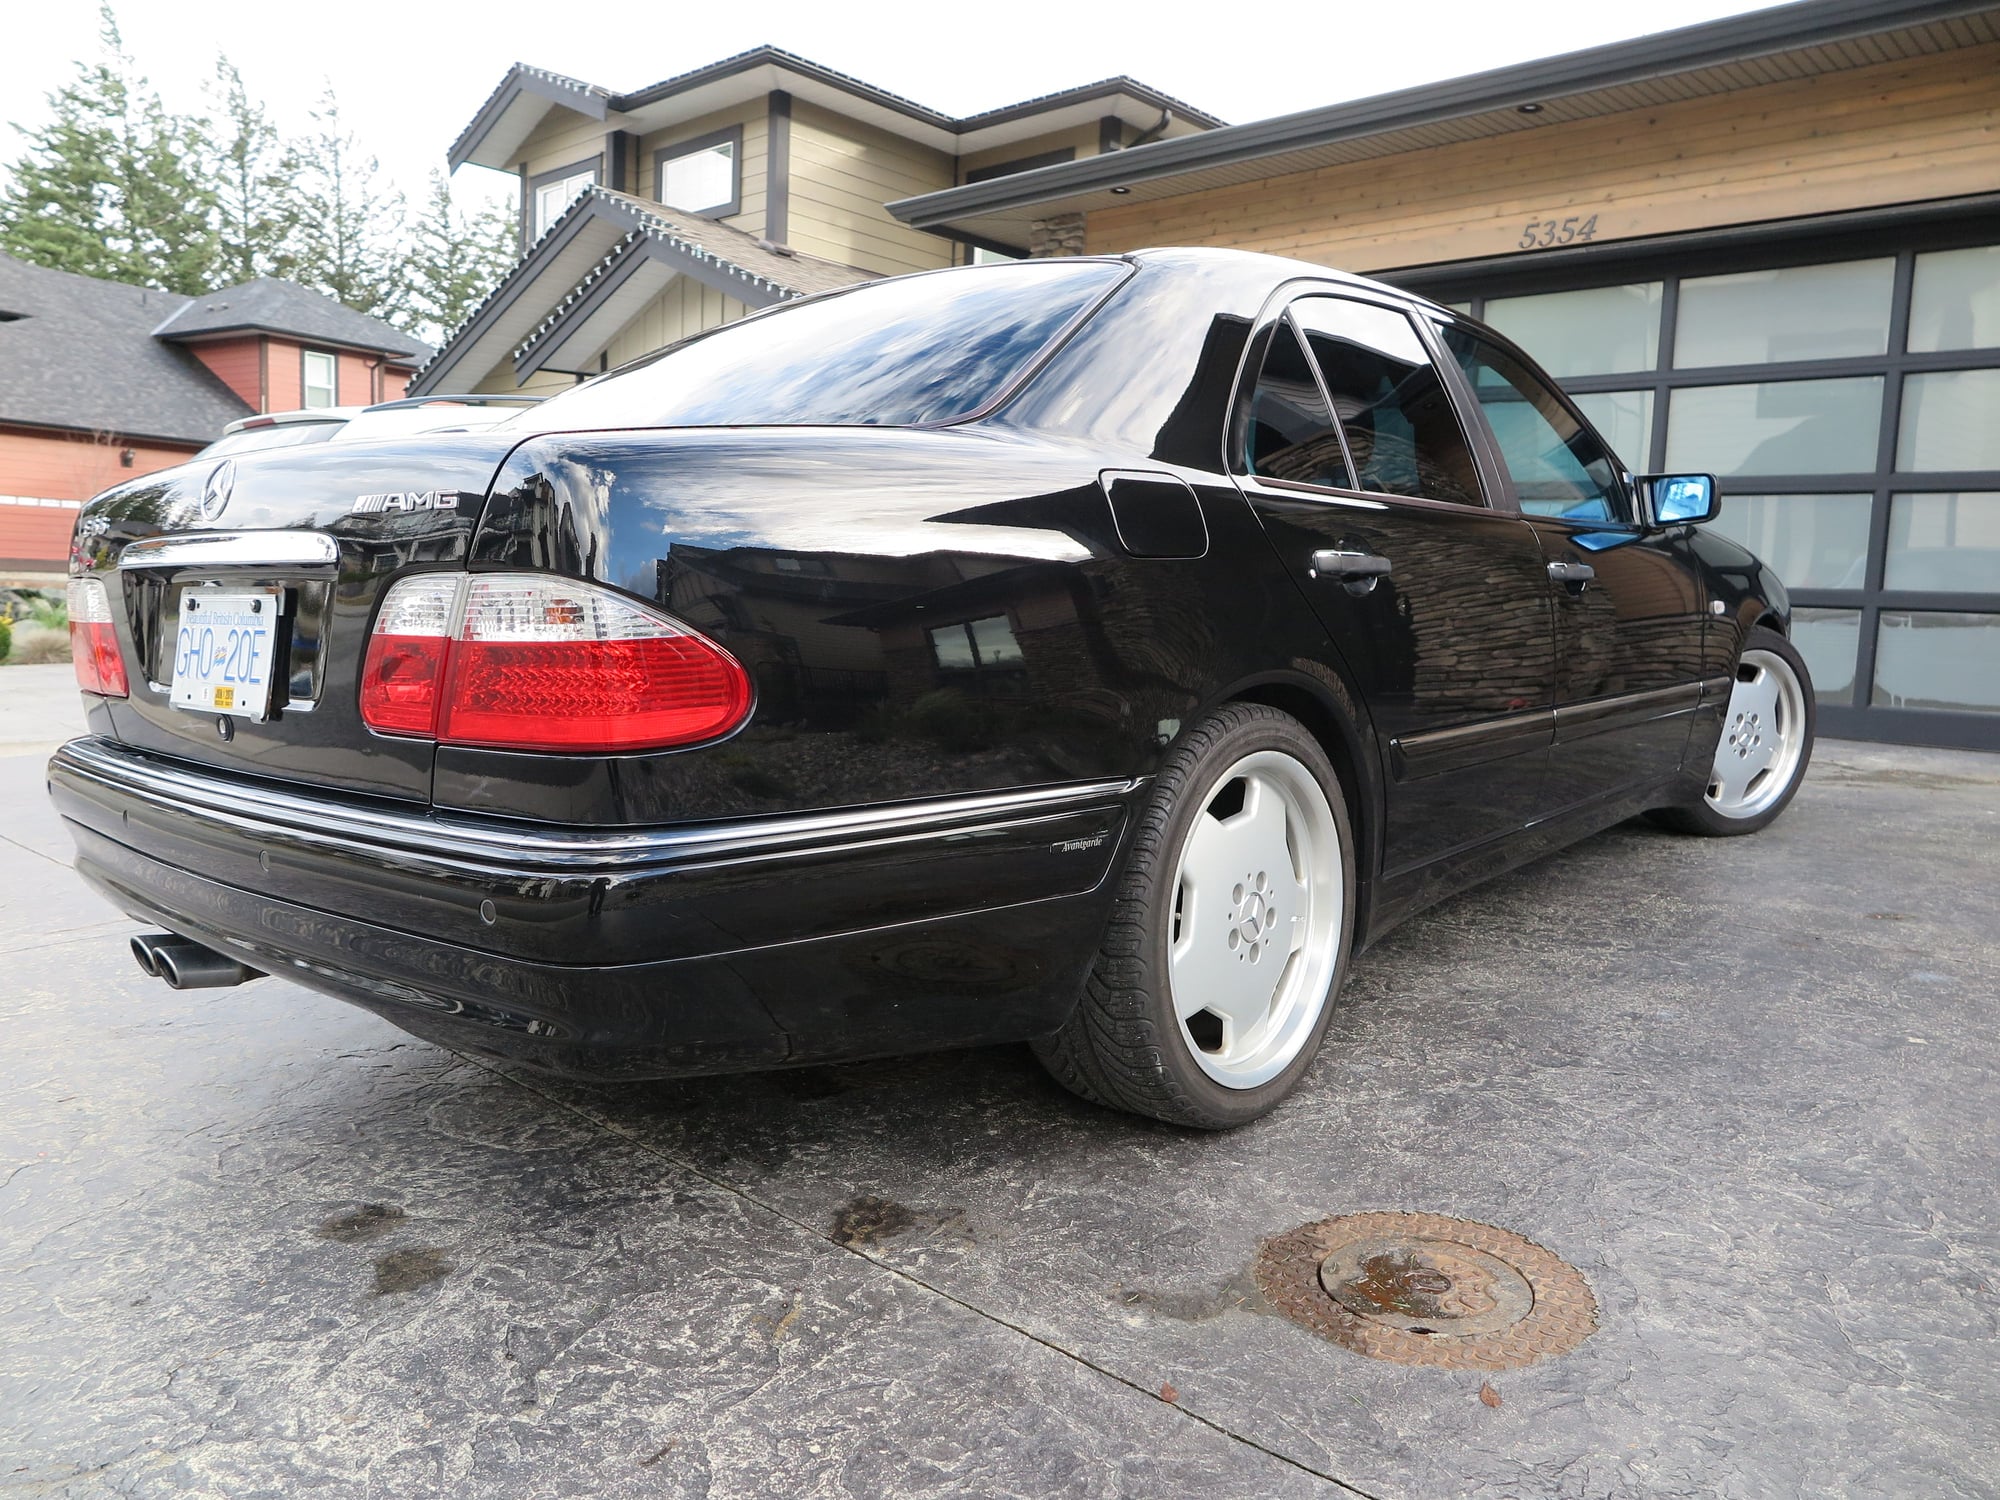 1998 Mercedes-Benz E55 AMG - 1998 E55 AMG 99,600 KM SINCE NEW, 2ND OWNER, ORIGINAL, NO ACCIDENTS - Used - VIN 1A515550 - 99,600 Miles - 8 cyl - 2WD - Automatic - Sedan - Black - Chilliwack, BC V2R0J6, Canada